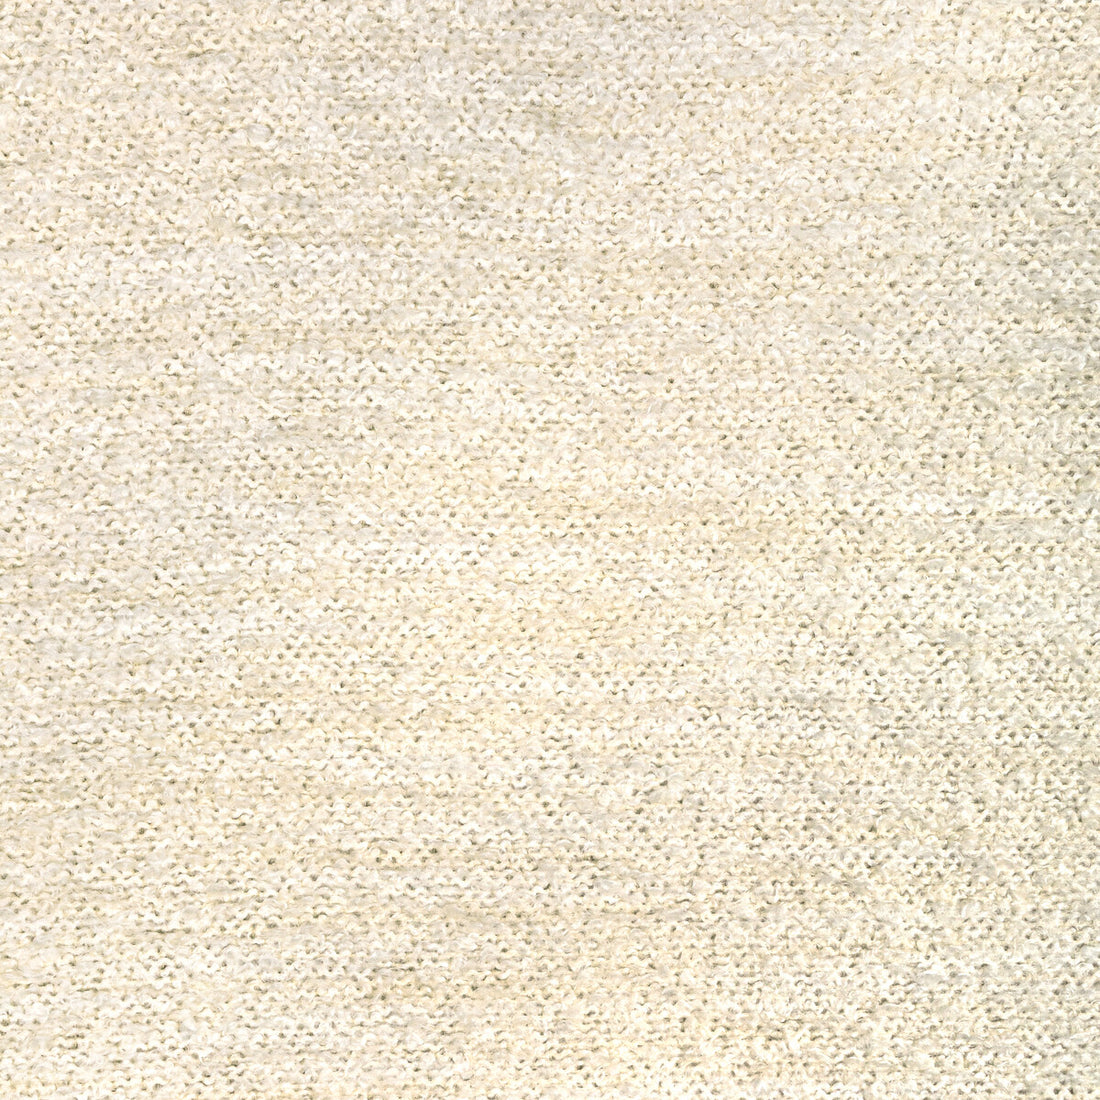 Unfray fabric in cream color - pattern 36399.1.0 - by Kravet Couture in the Jan Showers Charmant collection